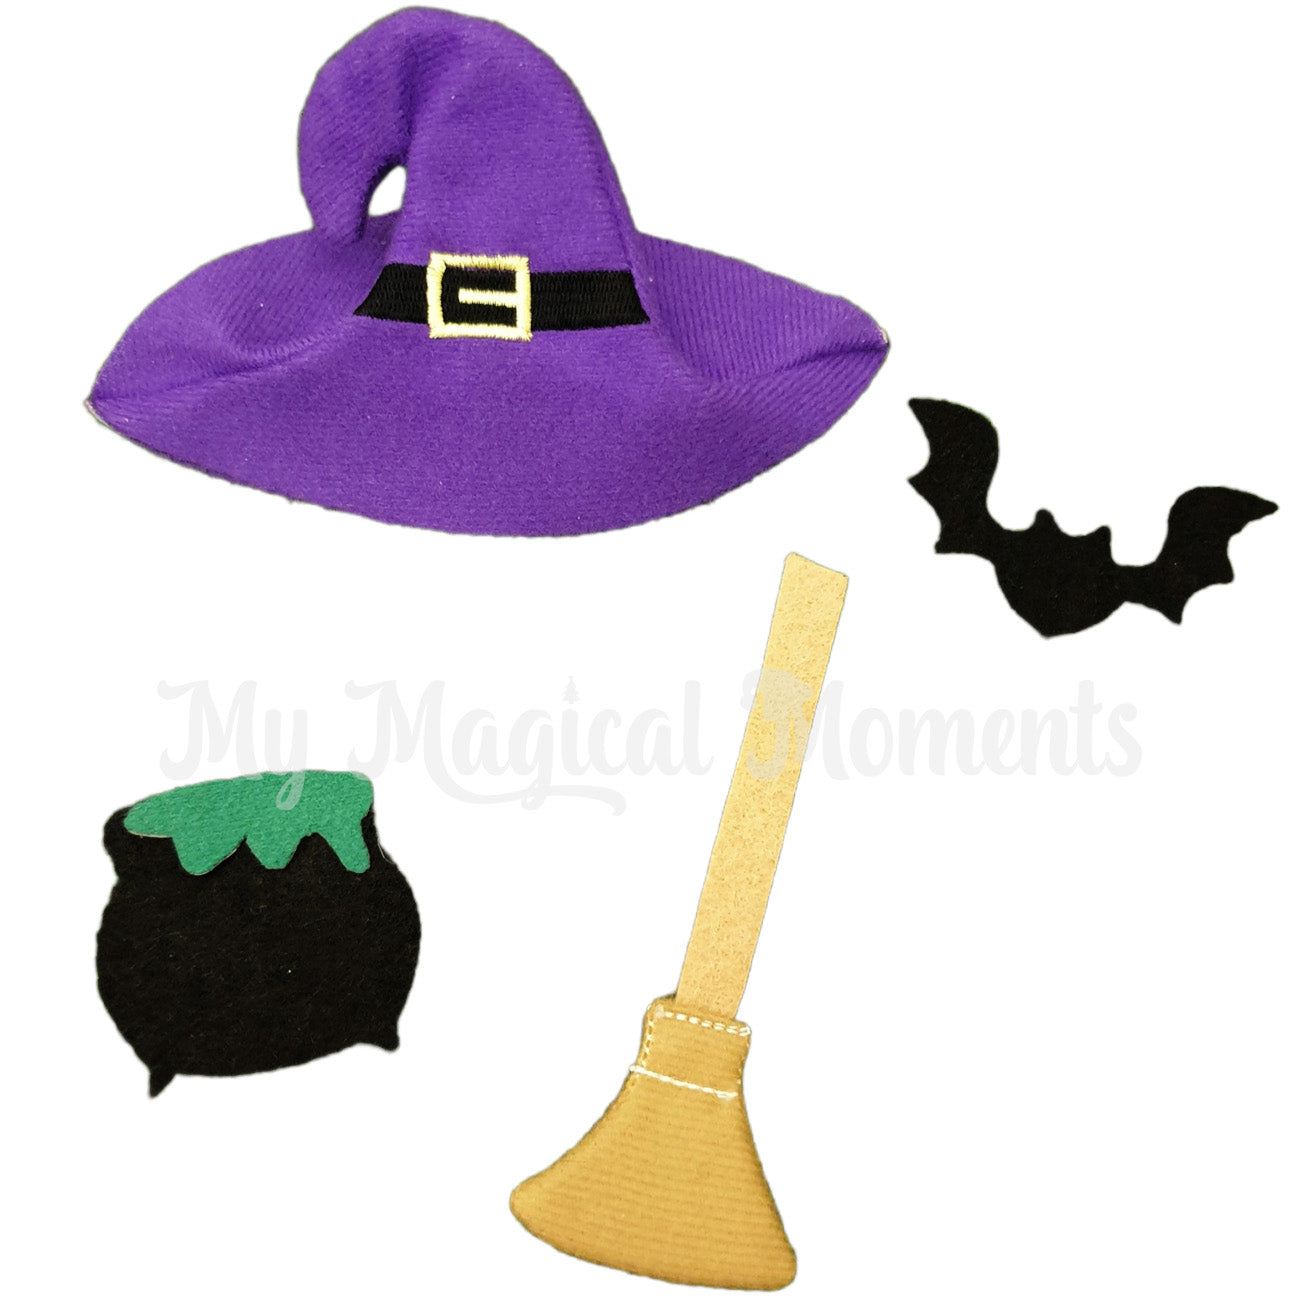 Witch elf outfit with purple hat, cauldron, broom and bat